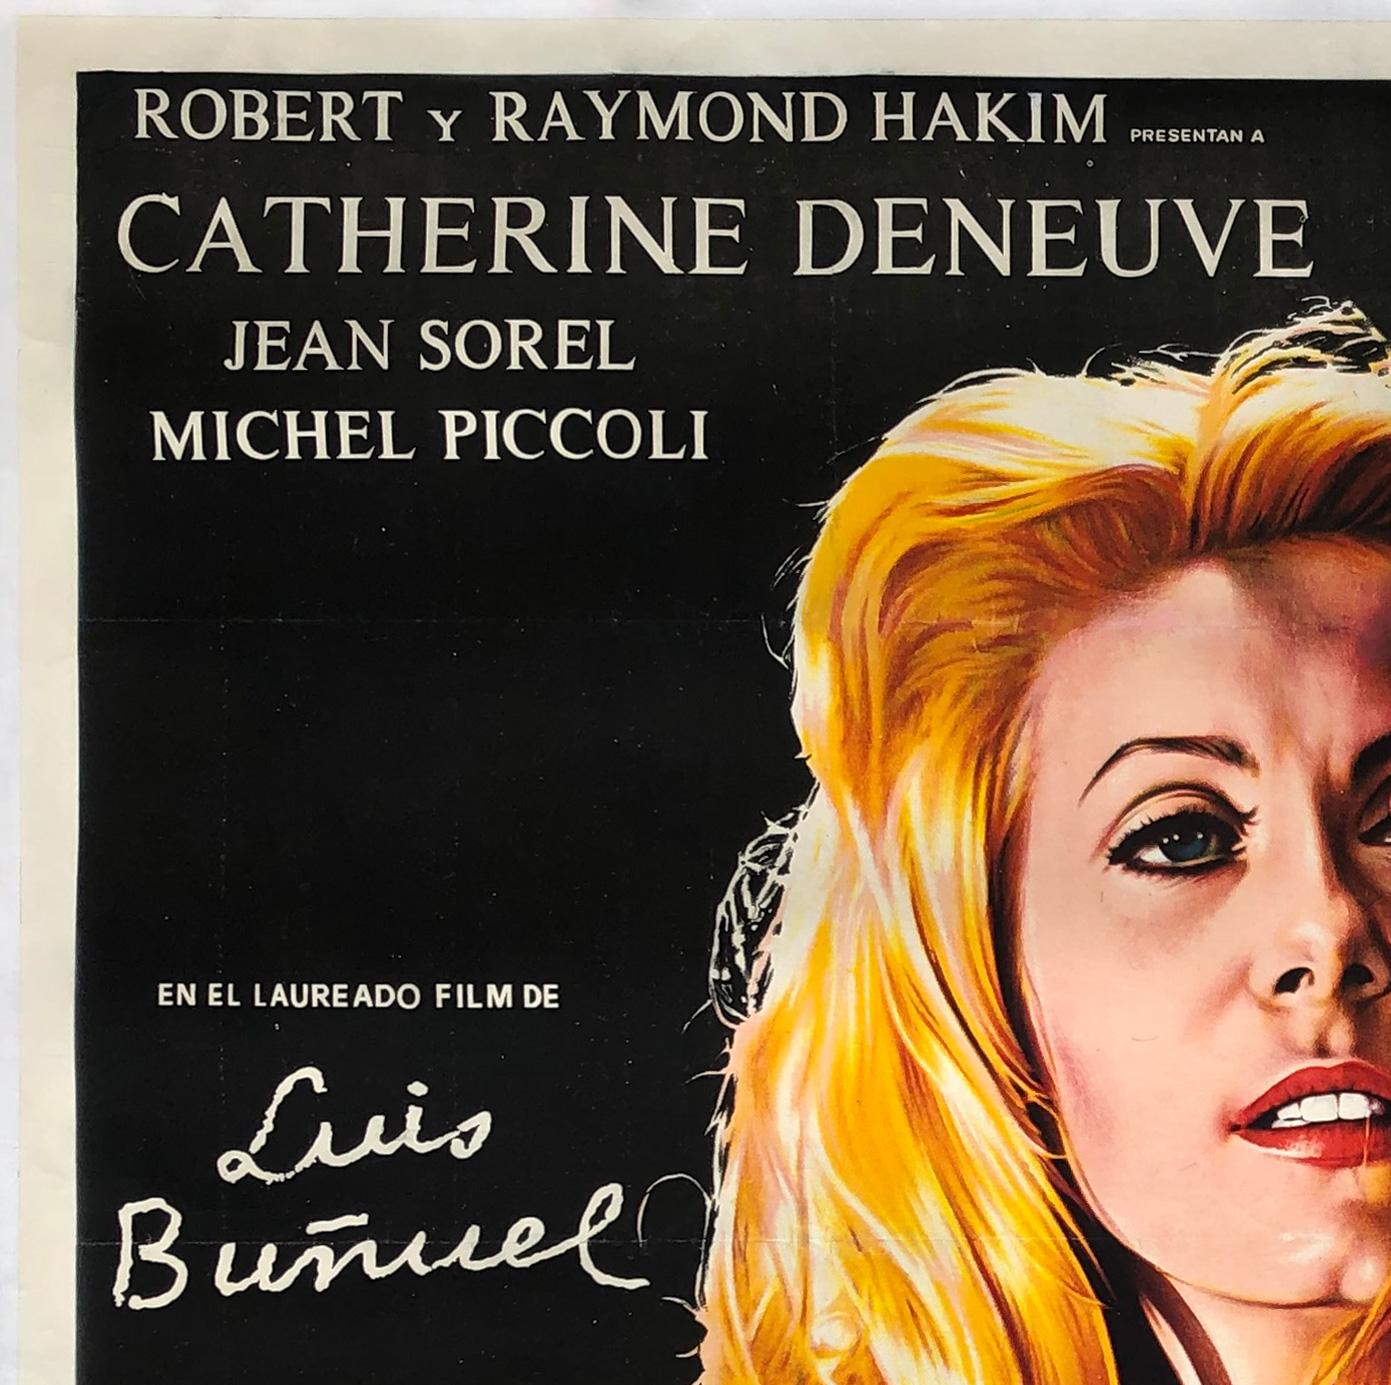 We adore Belle de Jour and this extremely rare Argentinian 2 sheet poster with artwork by Bloise features, in our opinion, the best design for the title. 

Poster is sized 43 3/4 x 57 3/4 inches (45 3/4 x 59 3/4 inches including linen-backing).